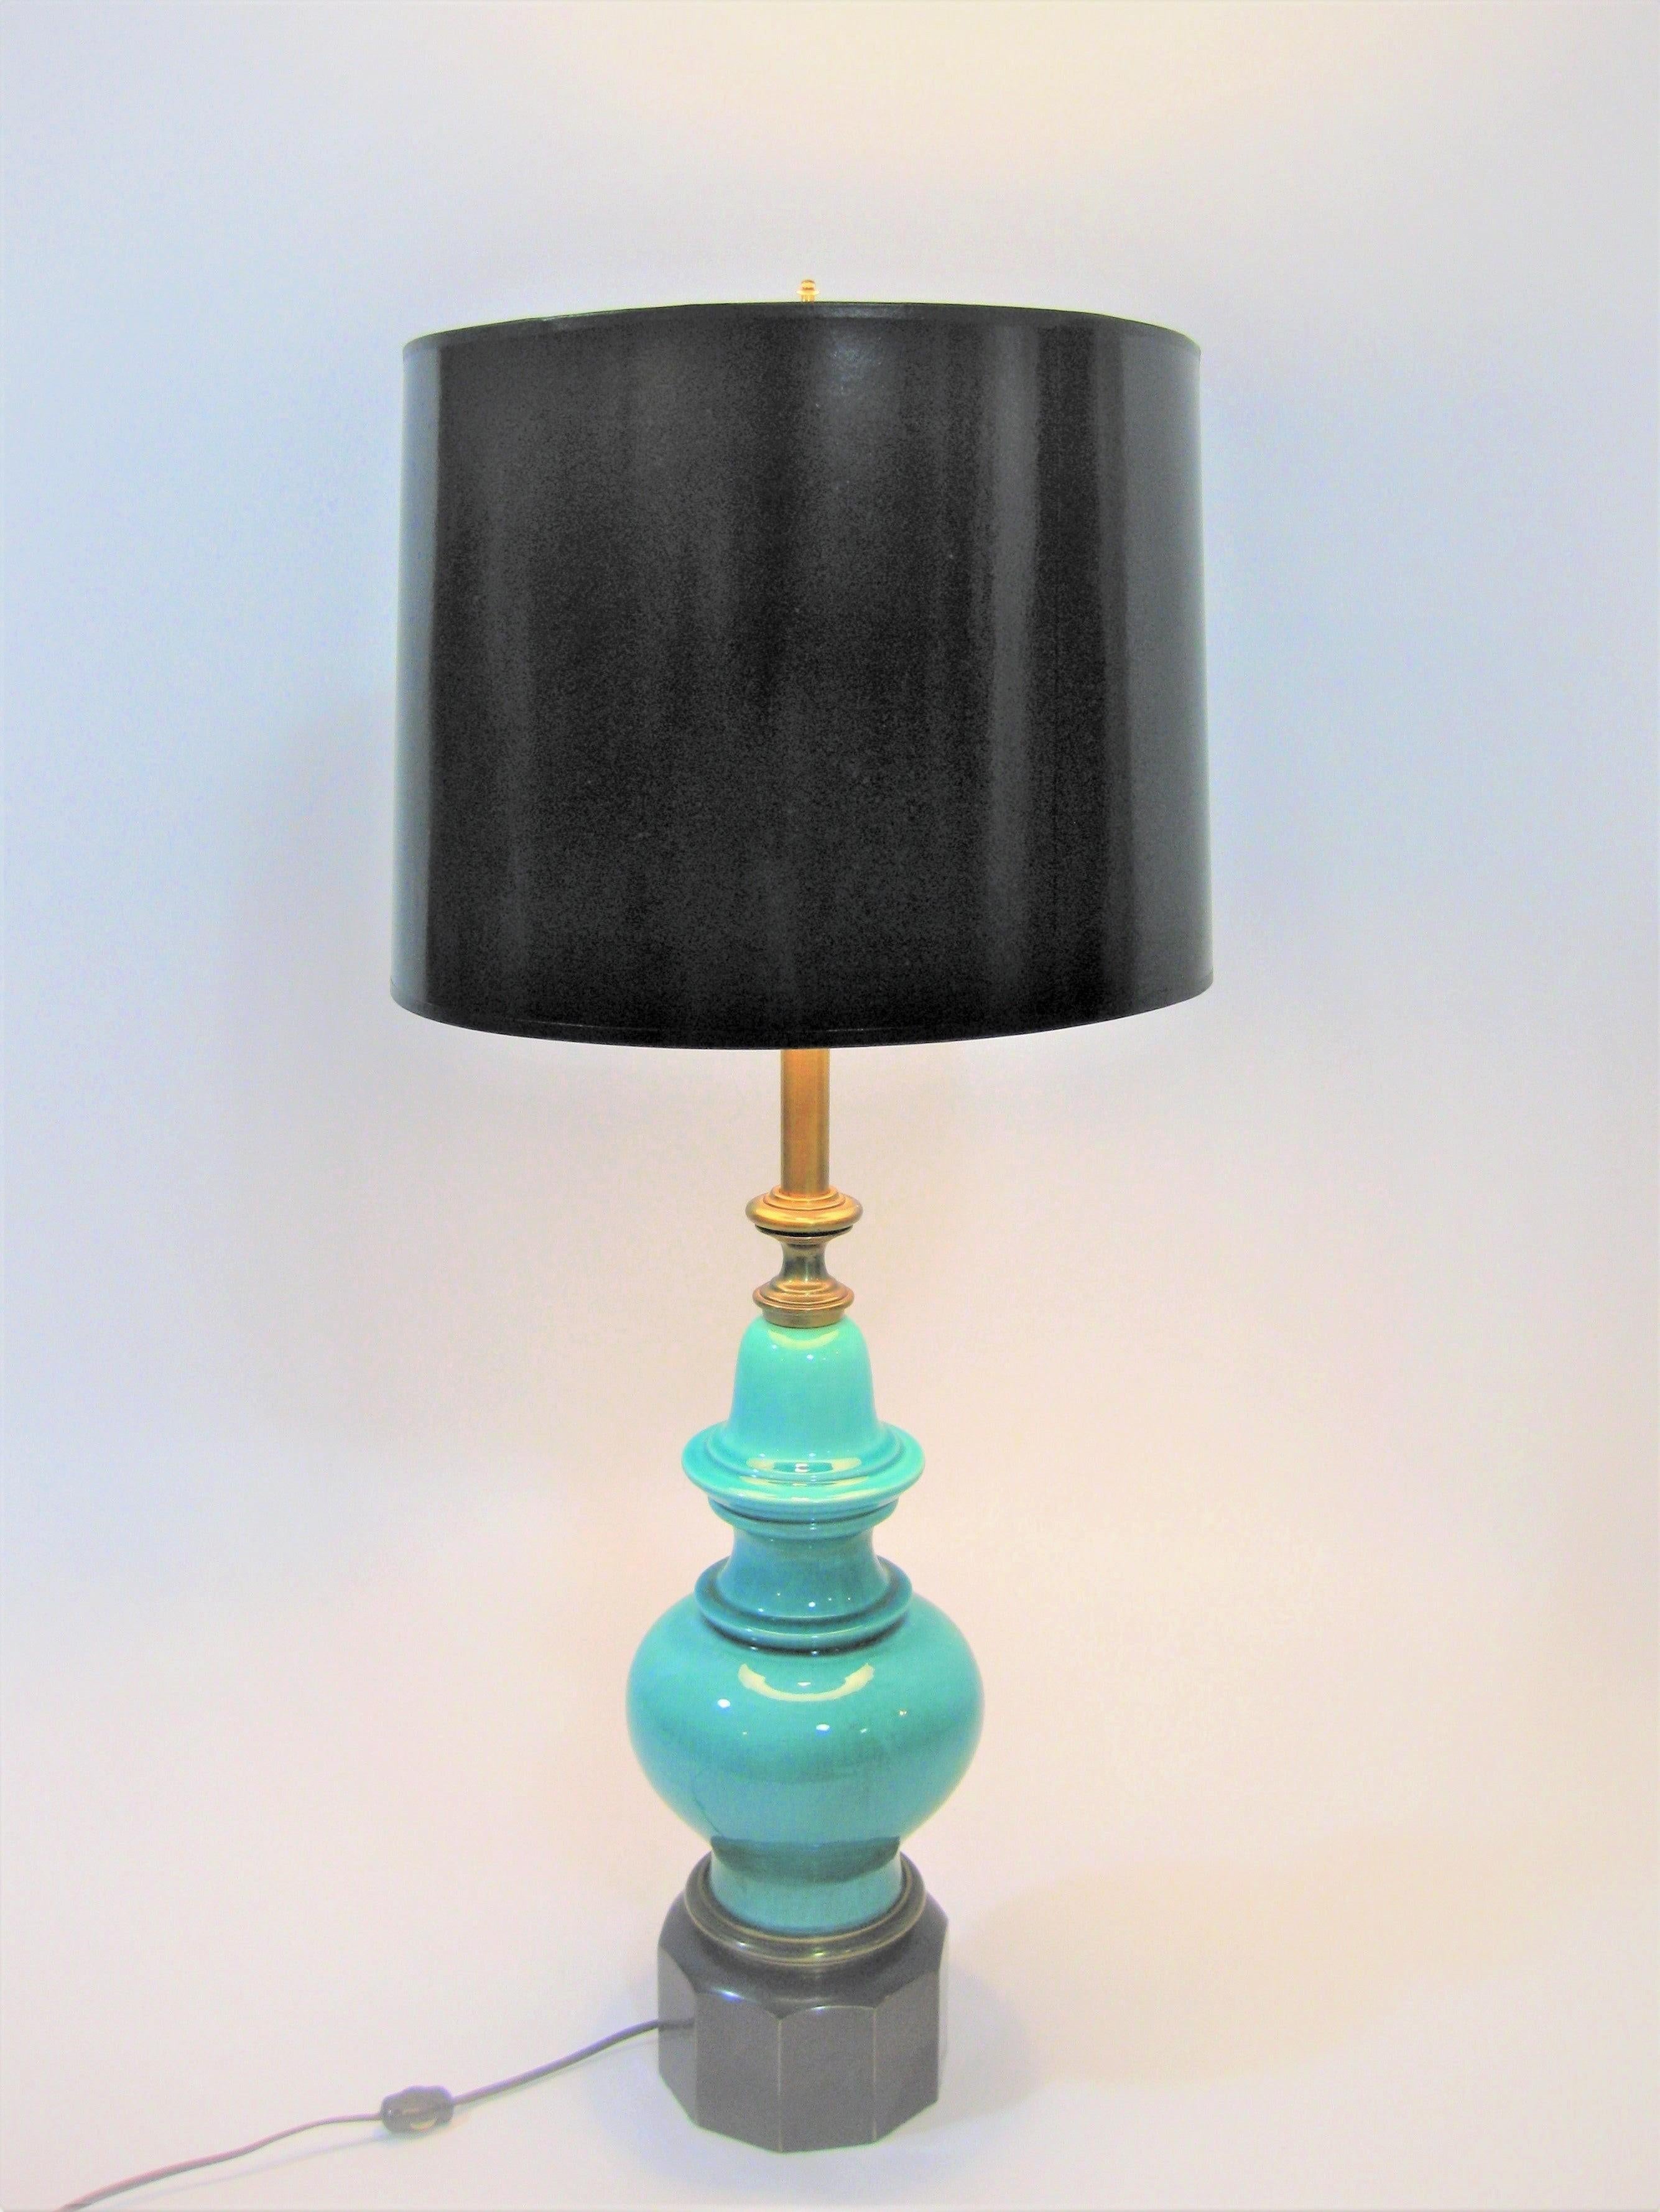 1950s Vibrant color of turquoise. Crackle glazed ceramic. Substantial weight. Brass details and finial. Stiffel Markings. Made in America. Shade is for photo purposes and not included. Fabulous and Versatile Lamp! Excellent condition.